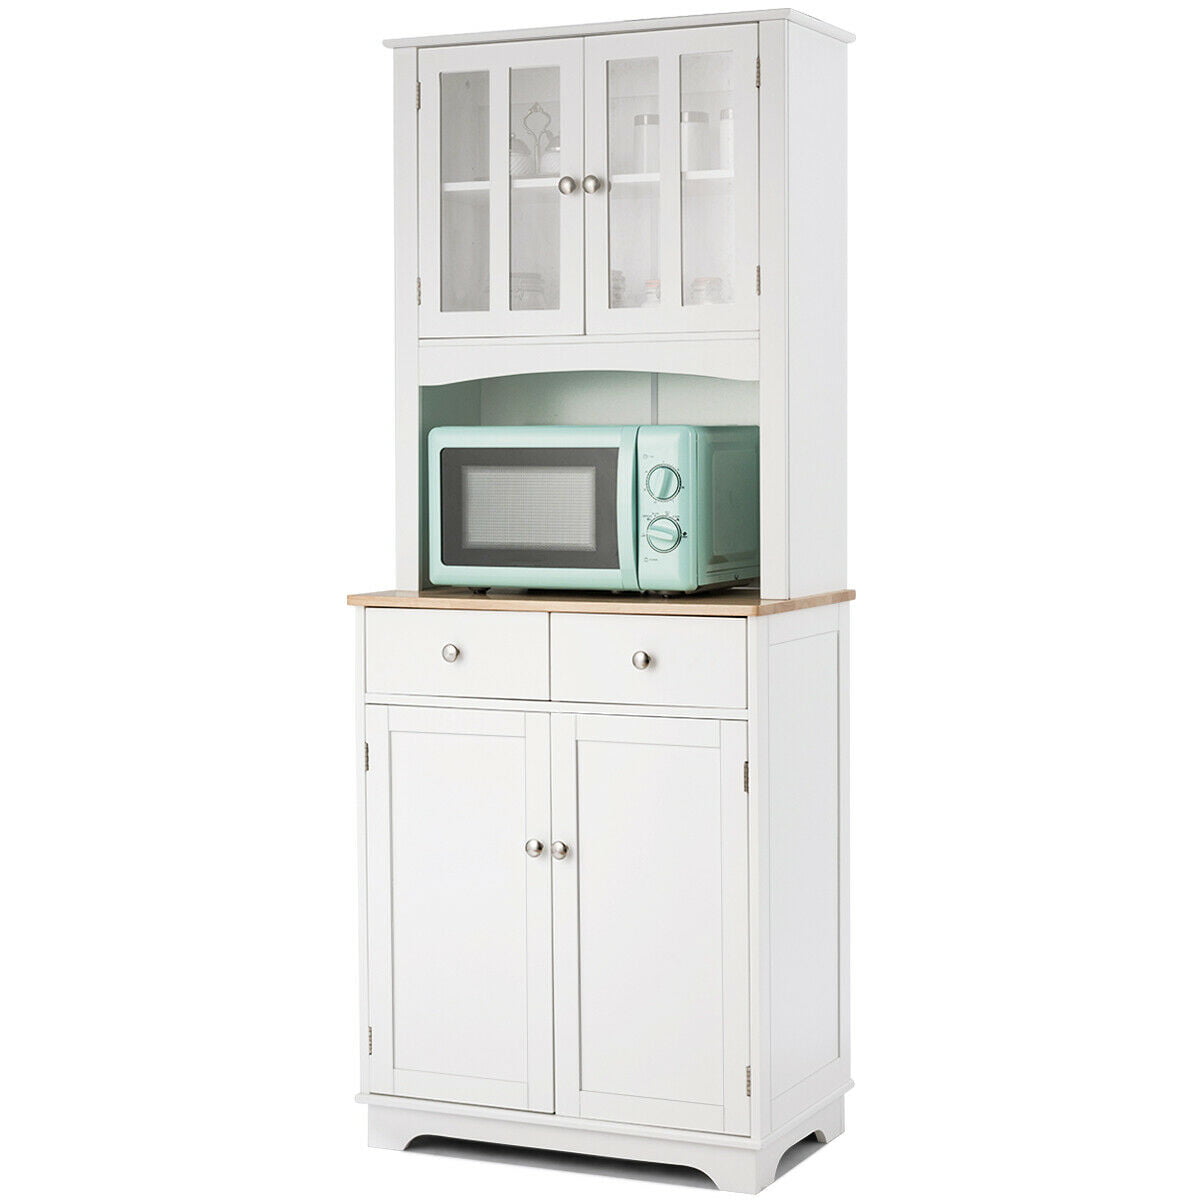  Kitchen Storage Cabinet With Microwave Cart for Simple Design